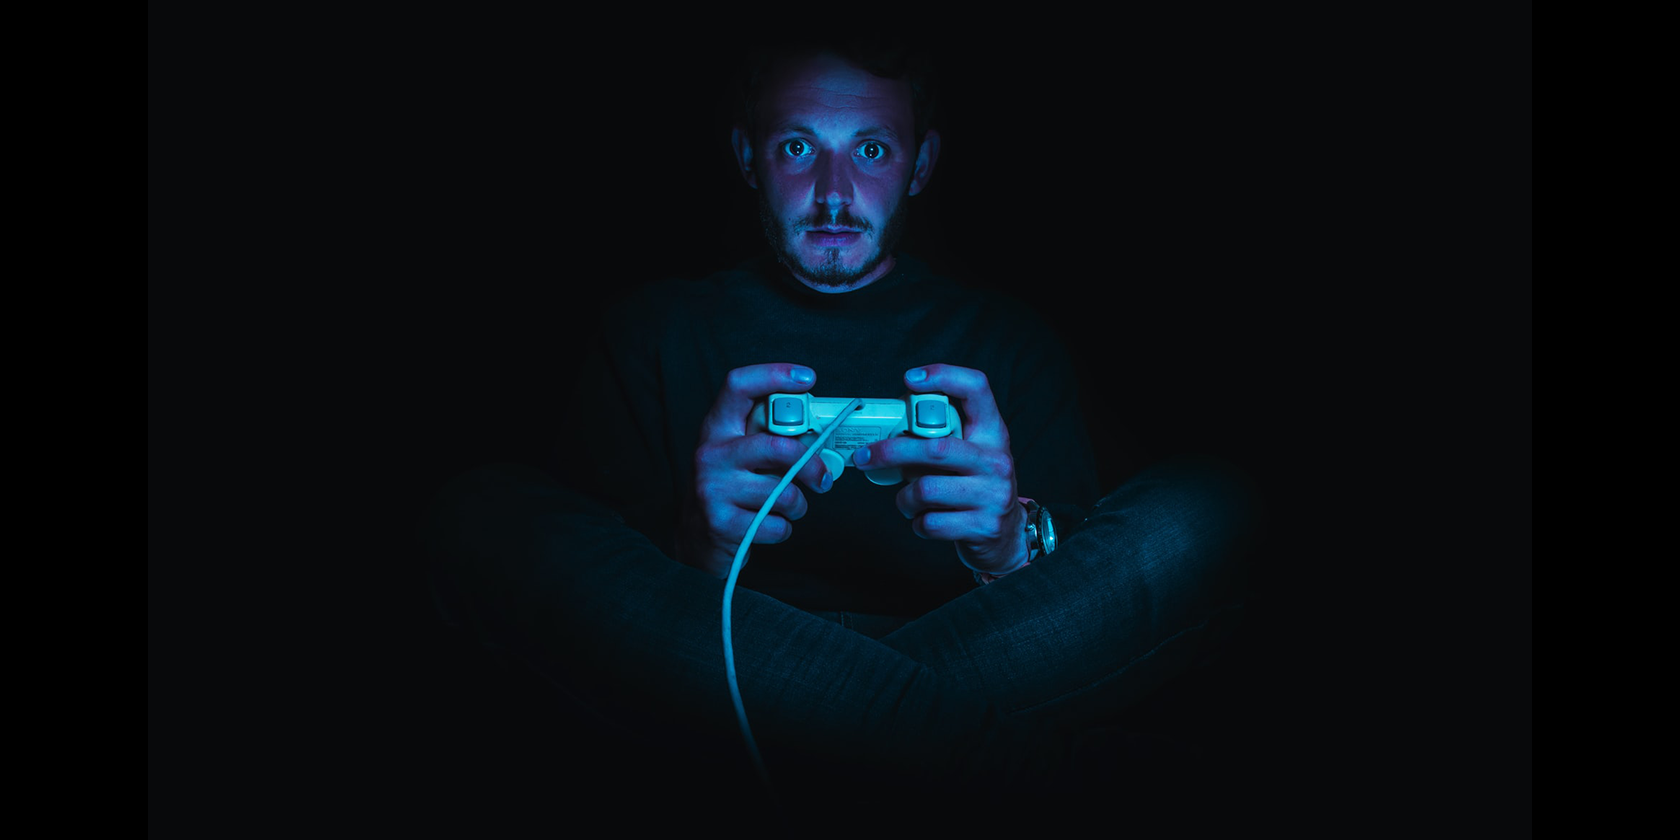 A guy playing video games in the dark